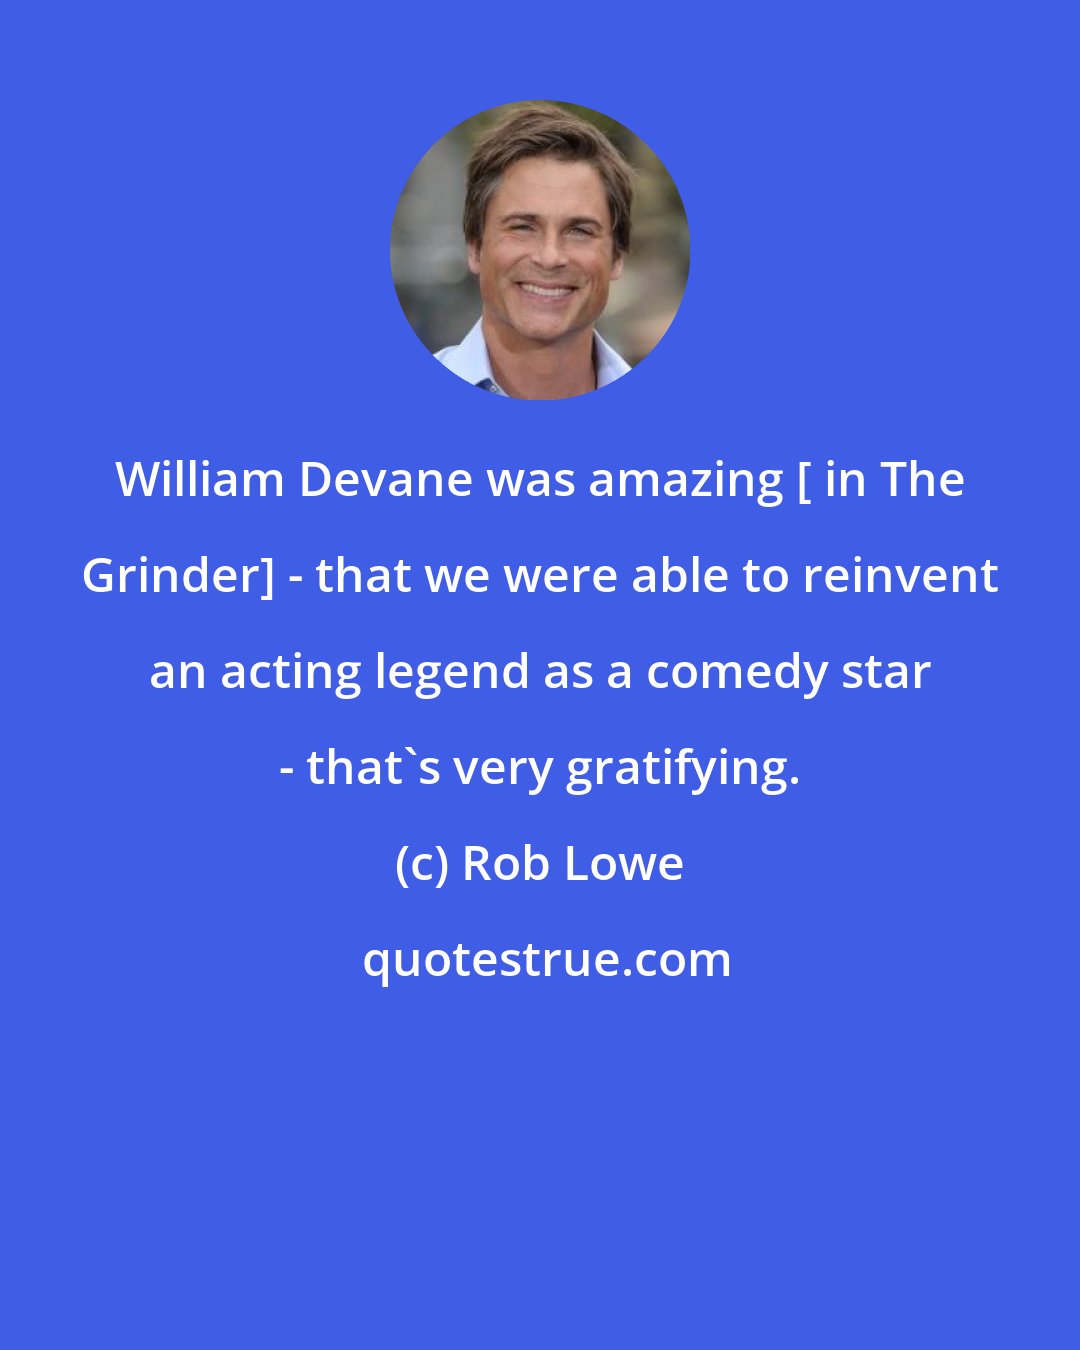 Rob Lowe: William Devane was amazing [ in The Grinder] - that we were able to reinvent an acting legend as a comedy star - that's very gratifying.